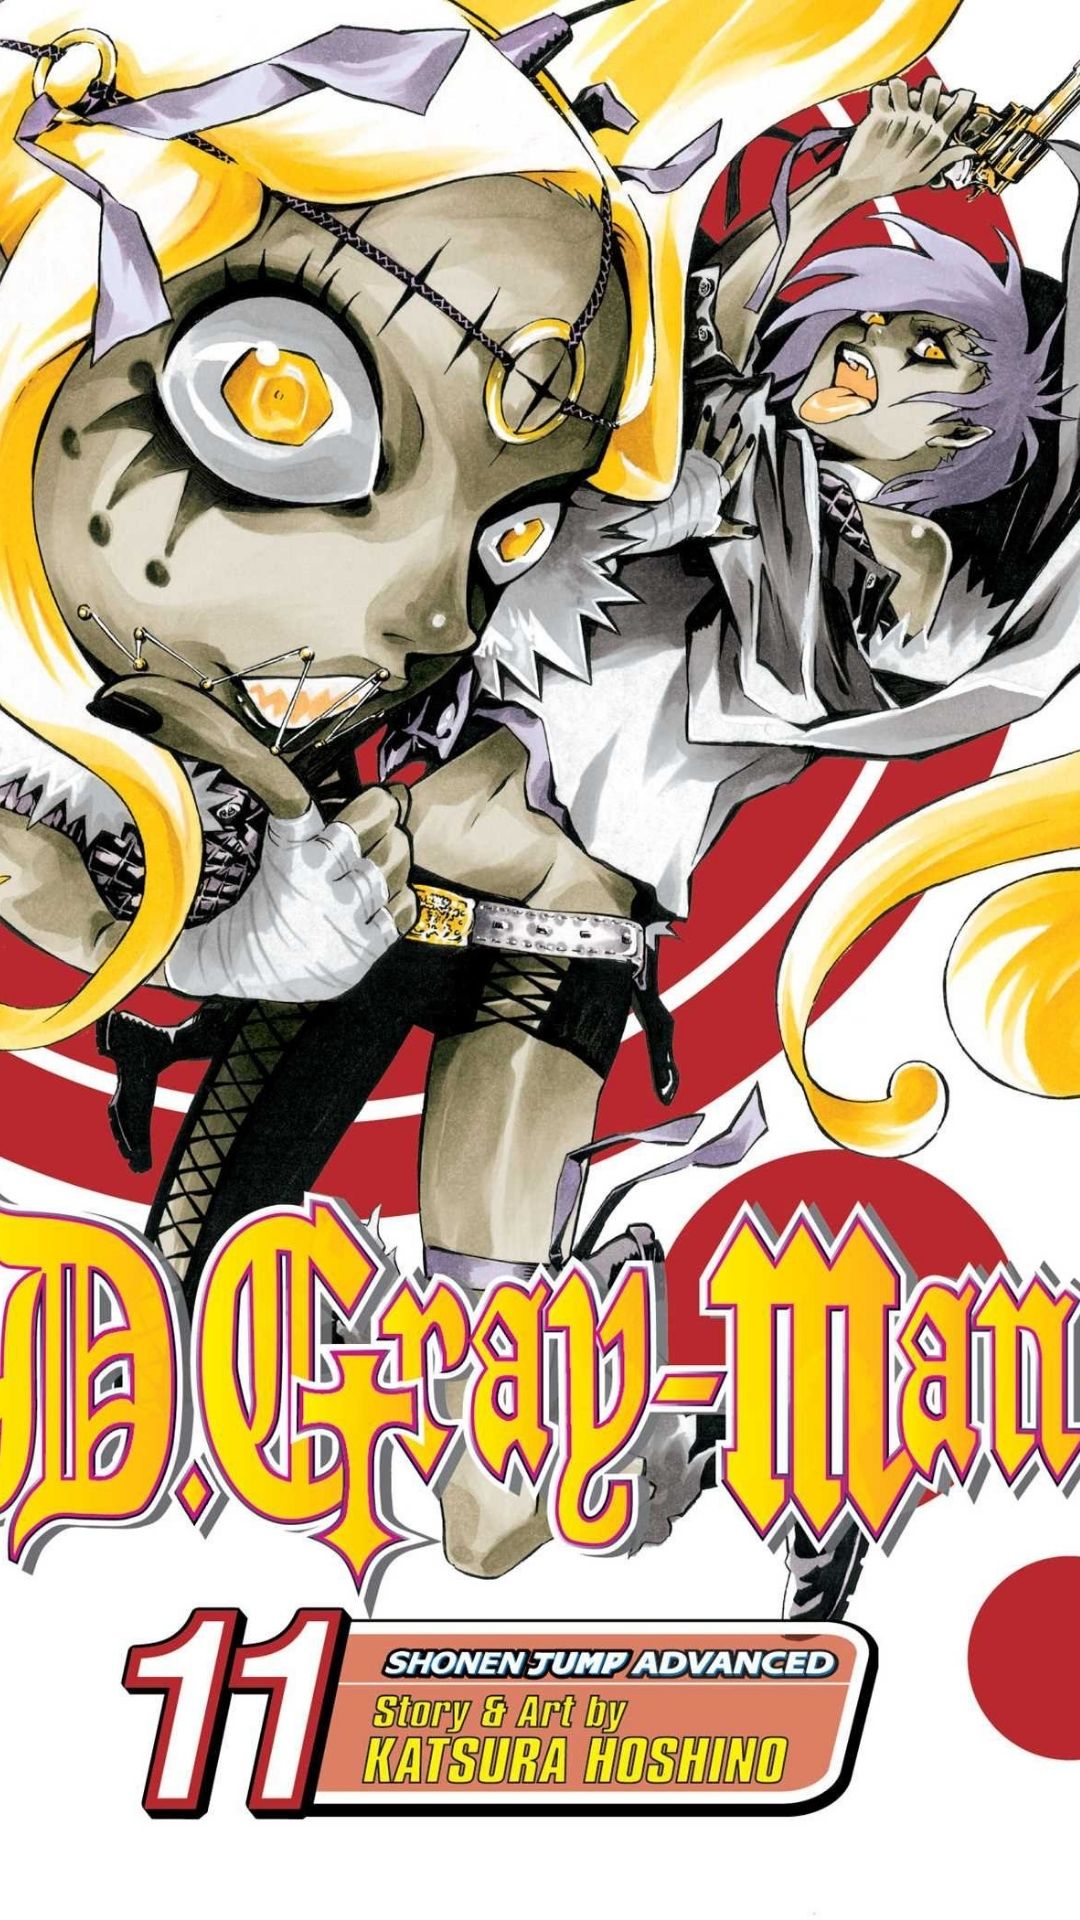 D Gray Man Draws Nearer To Main Point In July 21 Issue